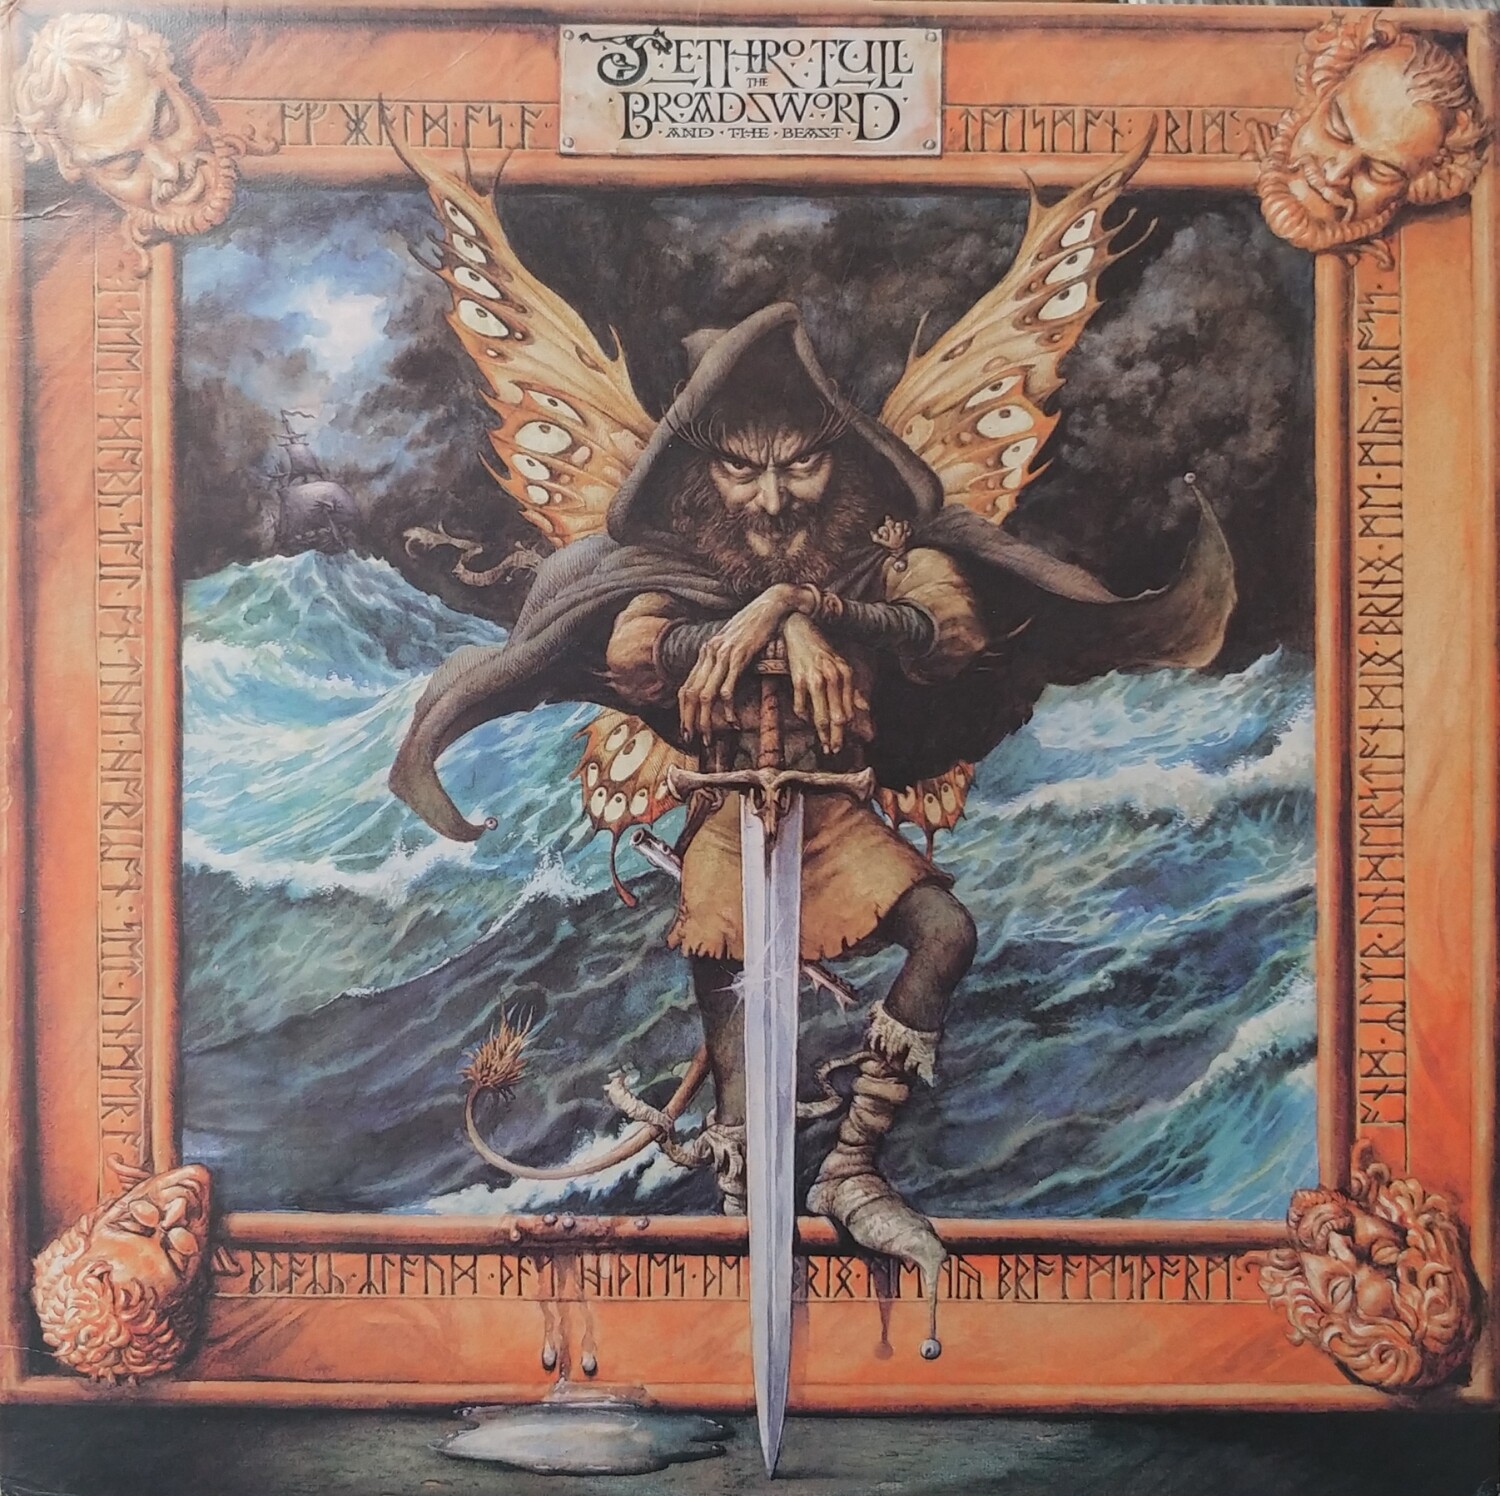 Jethro Tull - The broadsword and the beast